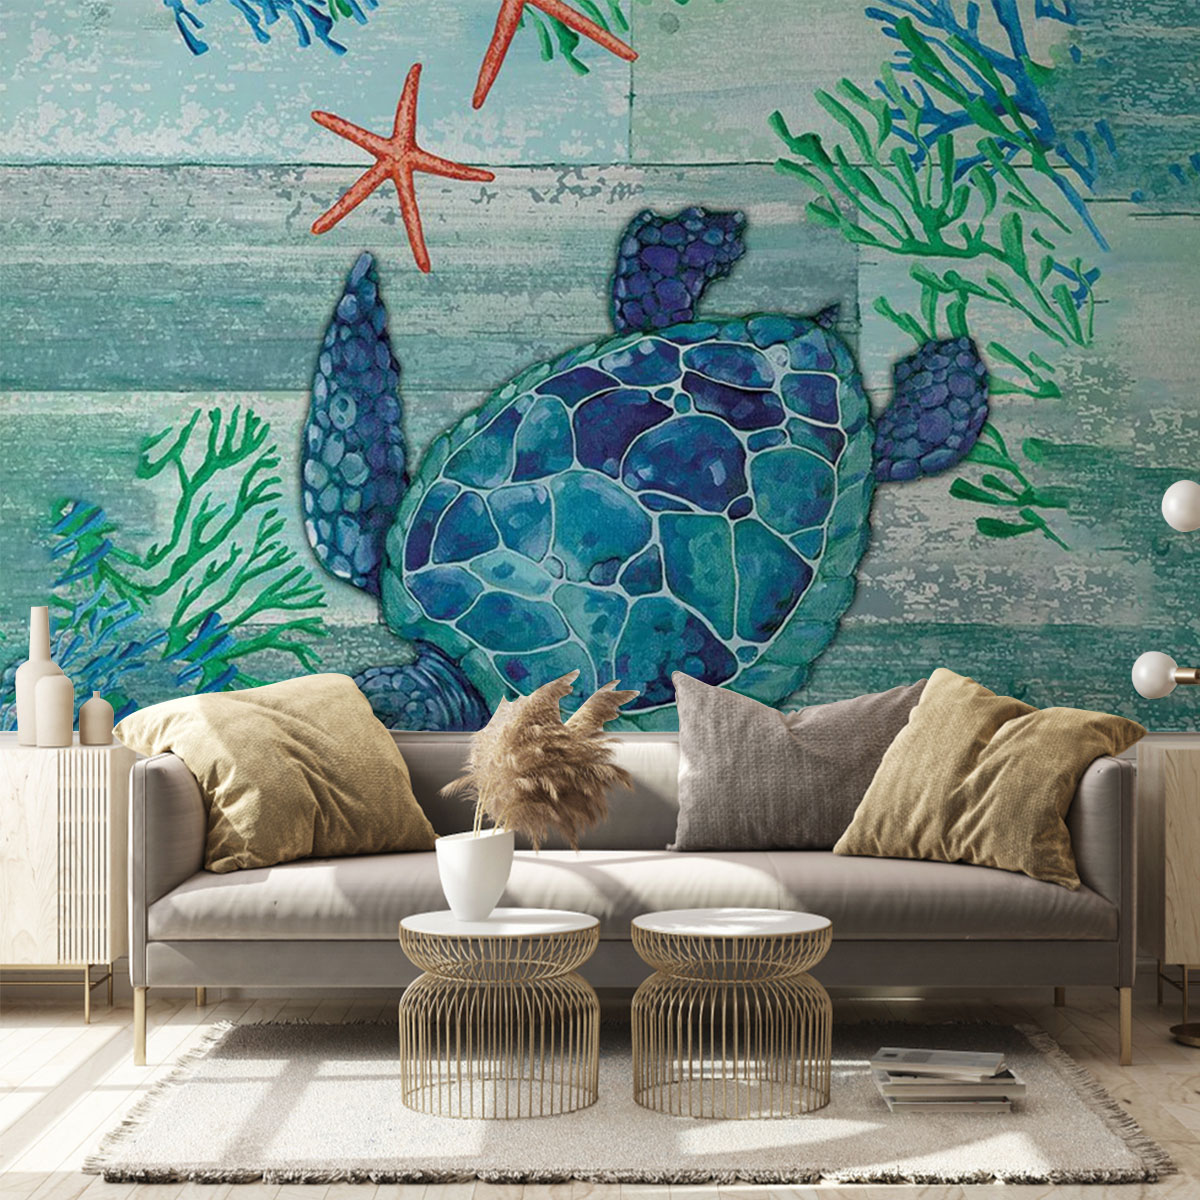 Cool Turtle Wall Mural_1_2.1